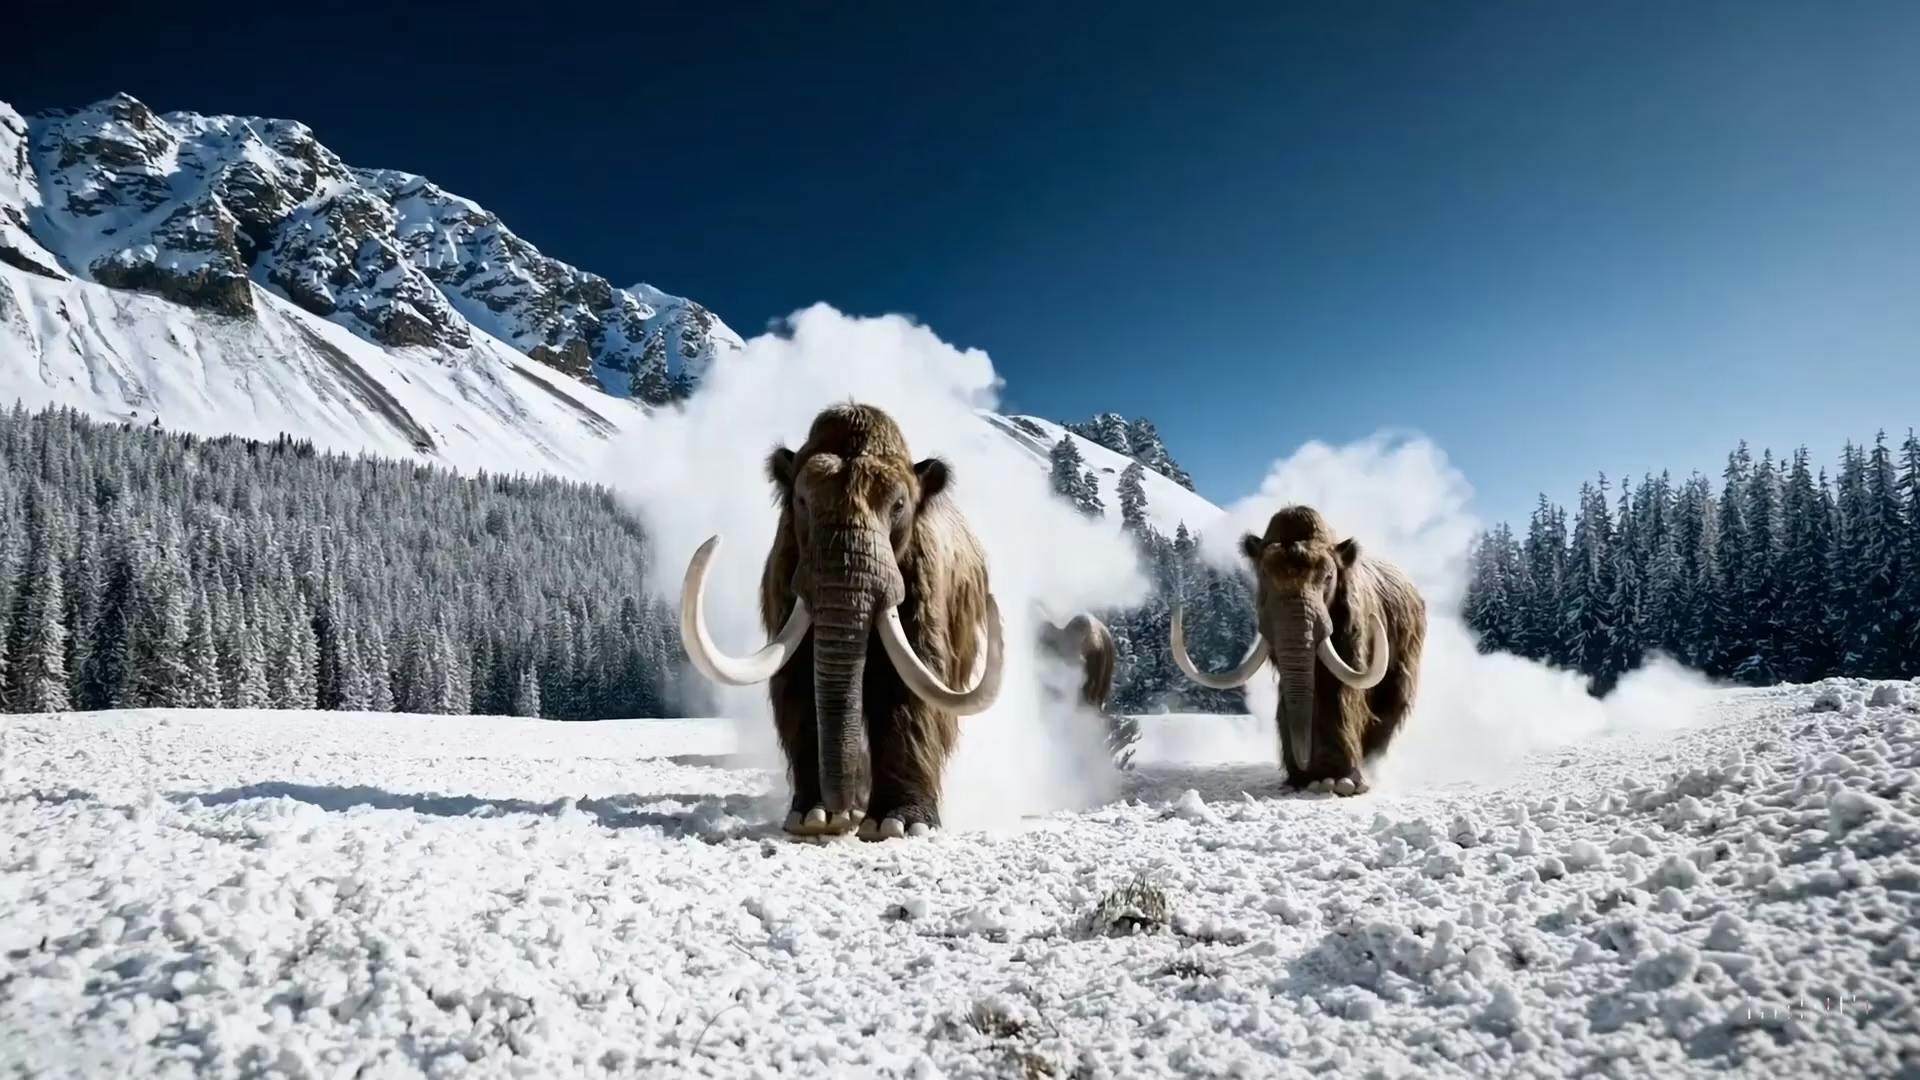 Wooly Mammoth Image